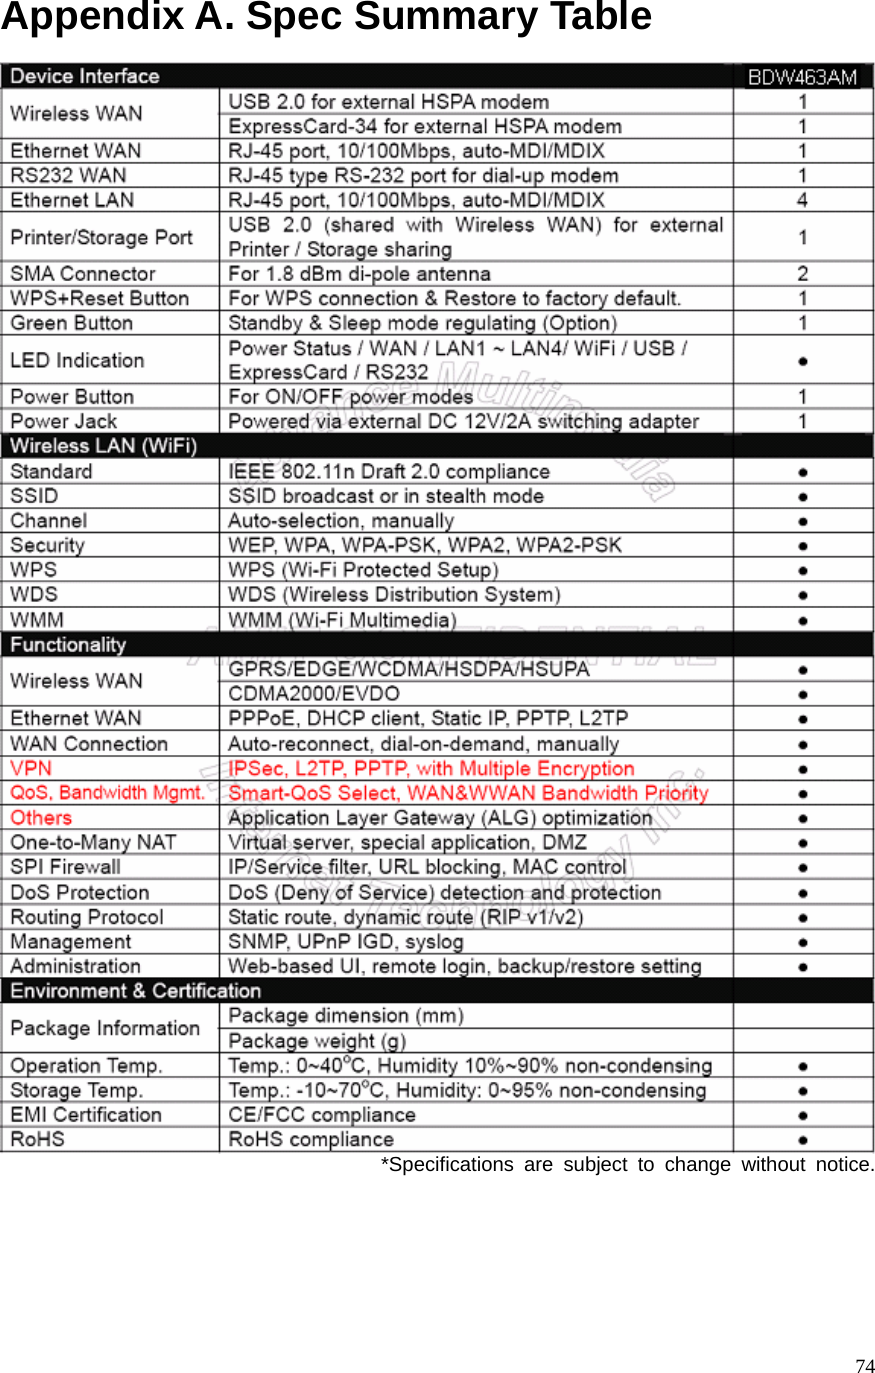  74Appendix A. Spec Summary Table                     *Specifications are subject to change without notice.